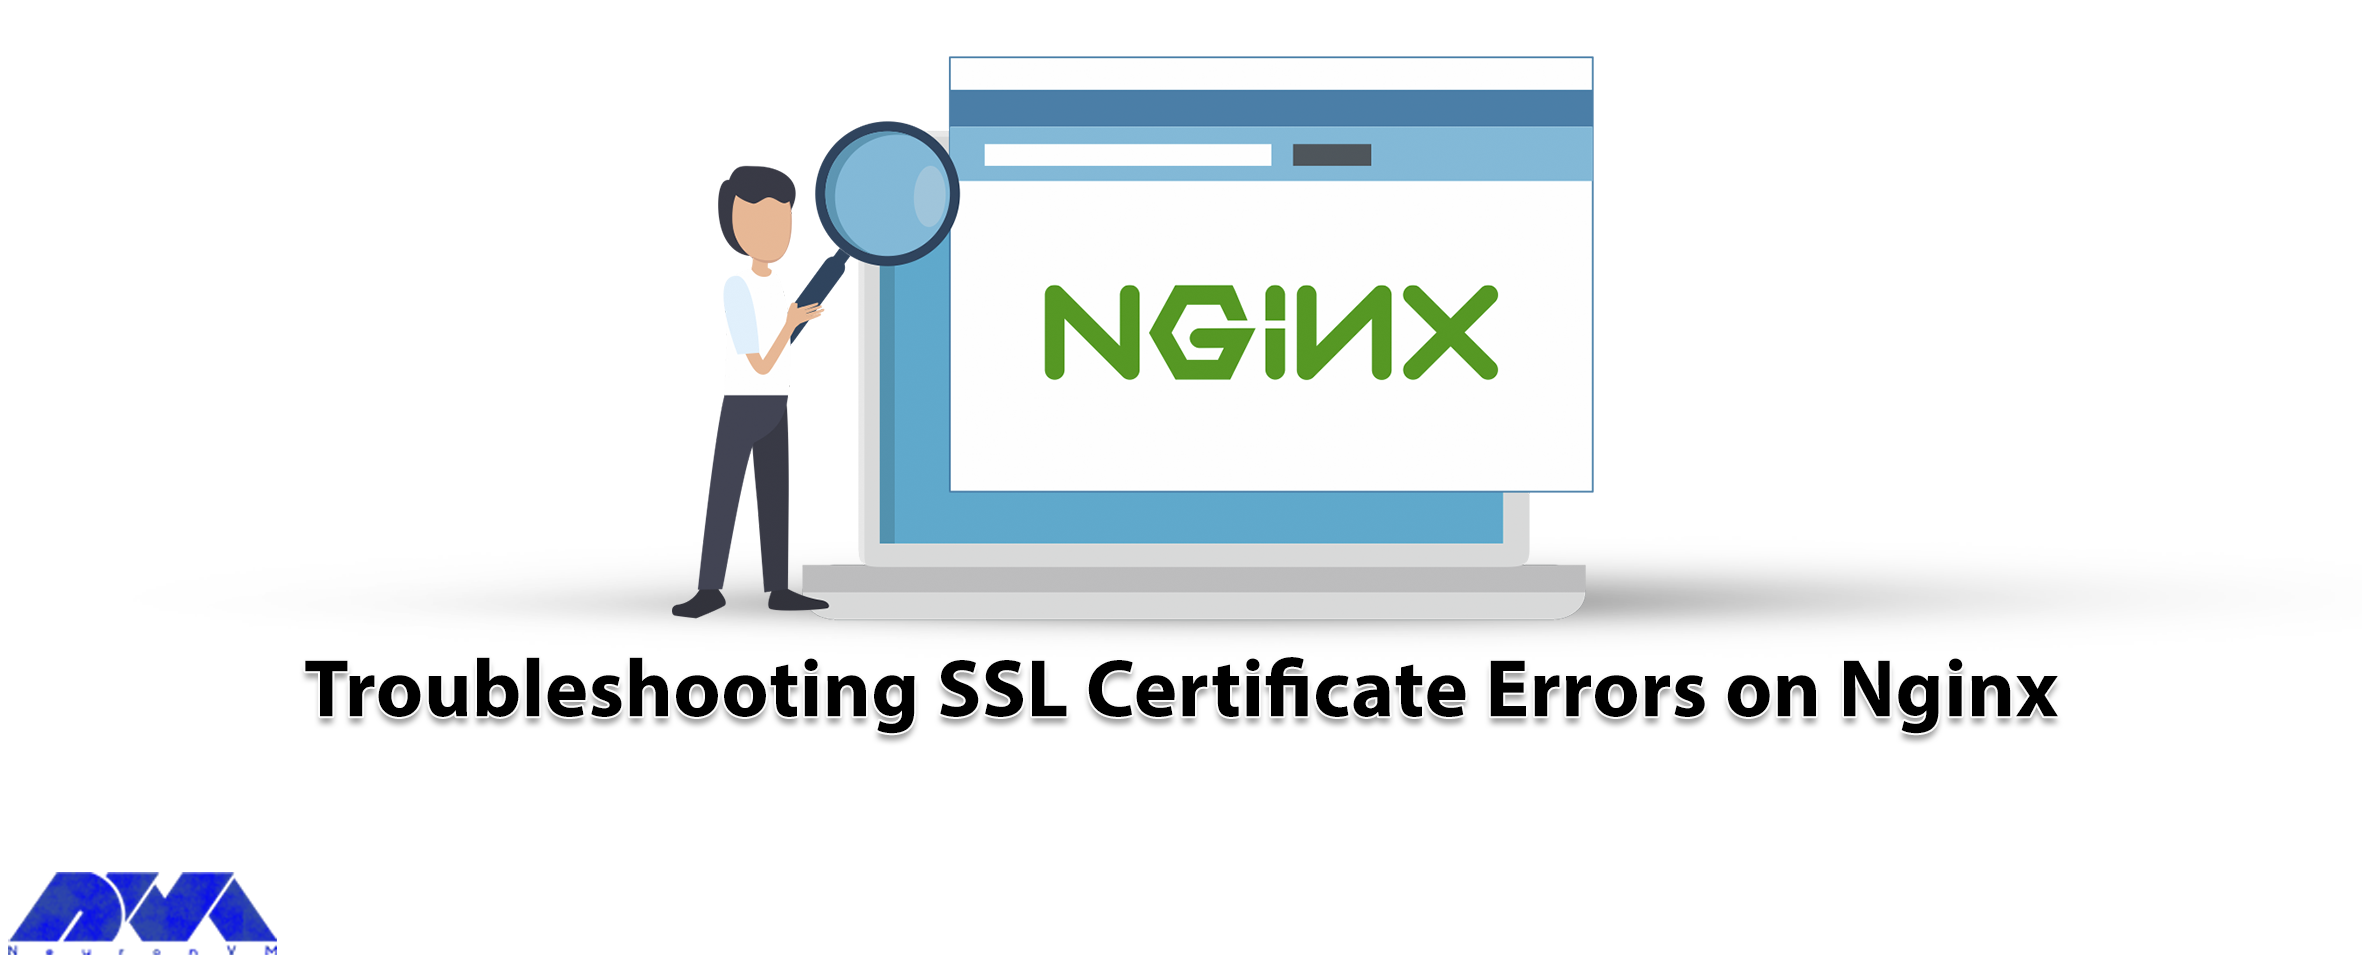 Troubleshooting SSL Certificate Errors on Nginx